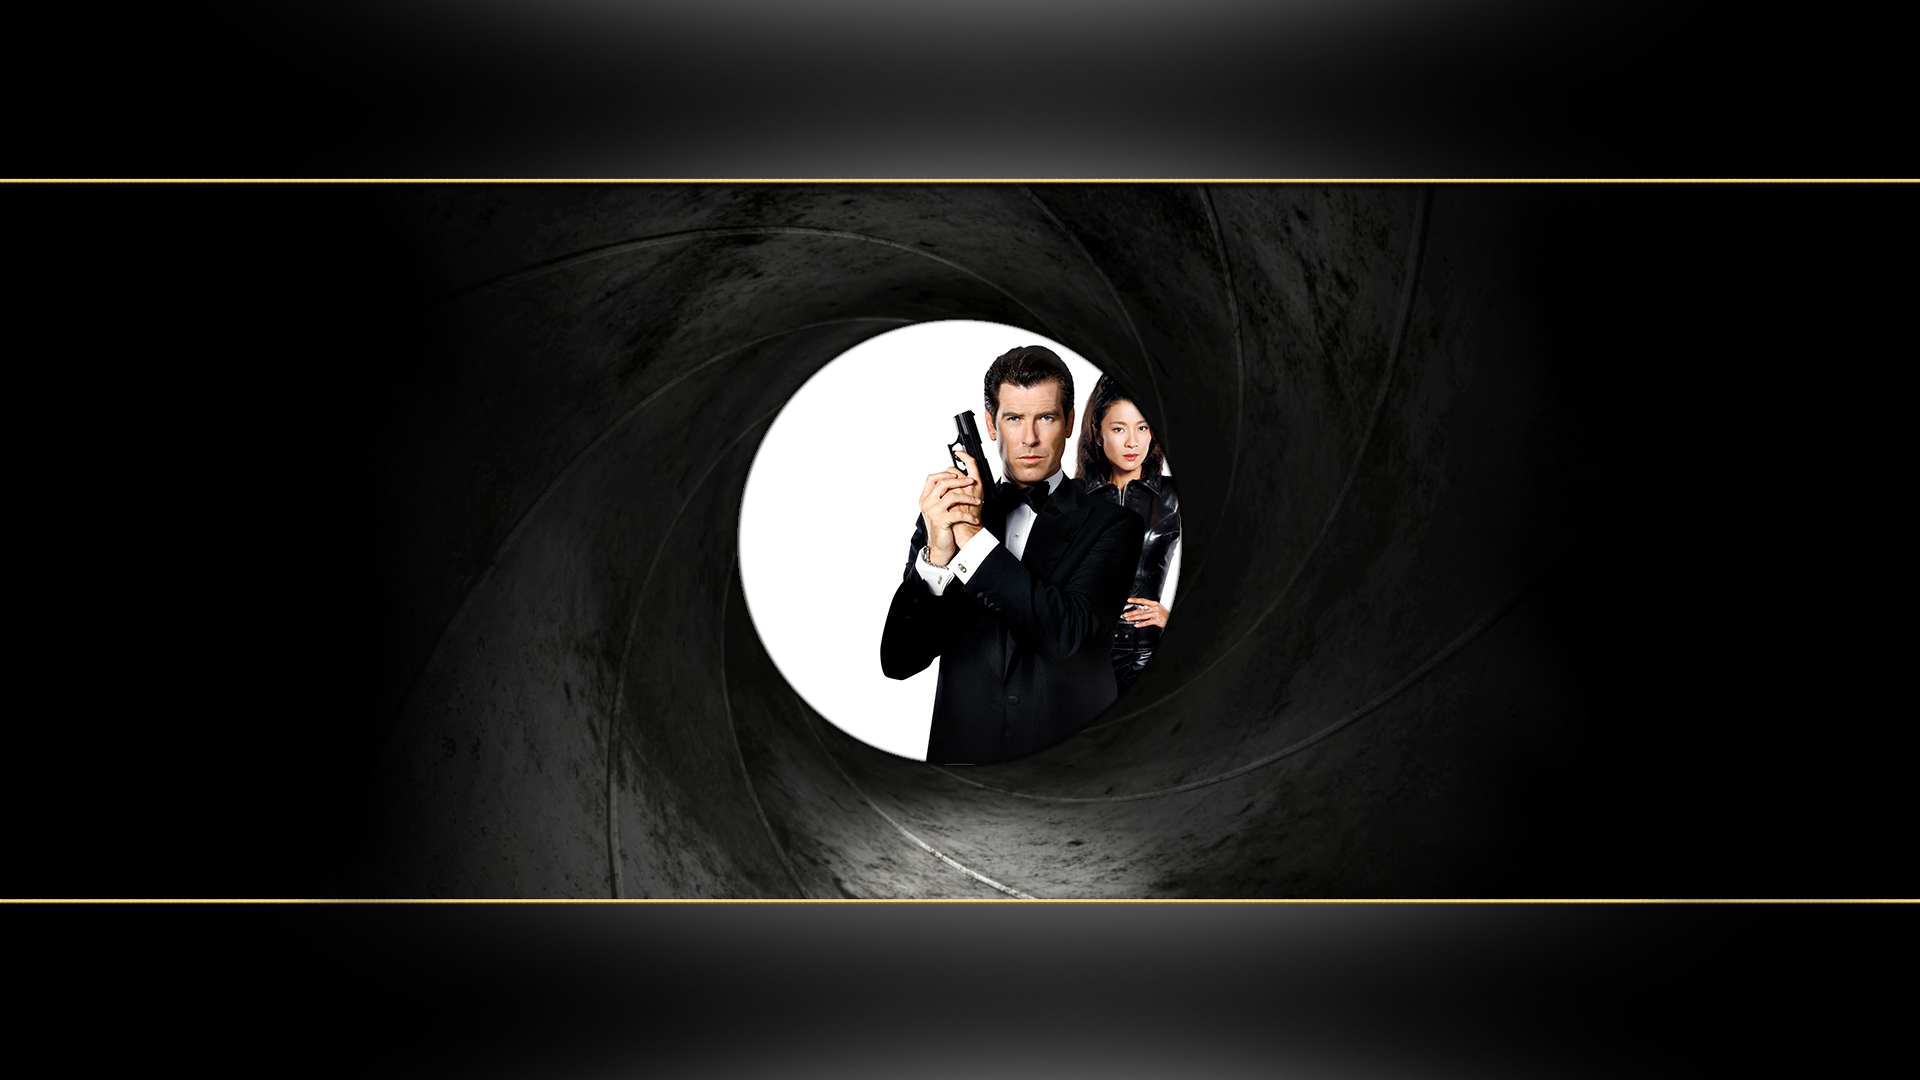 Video Game 007: Tomorrow Never Dies HD Wallpaper | Background Image